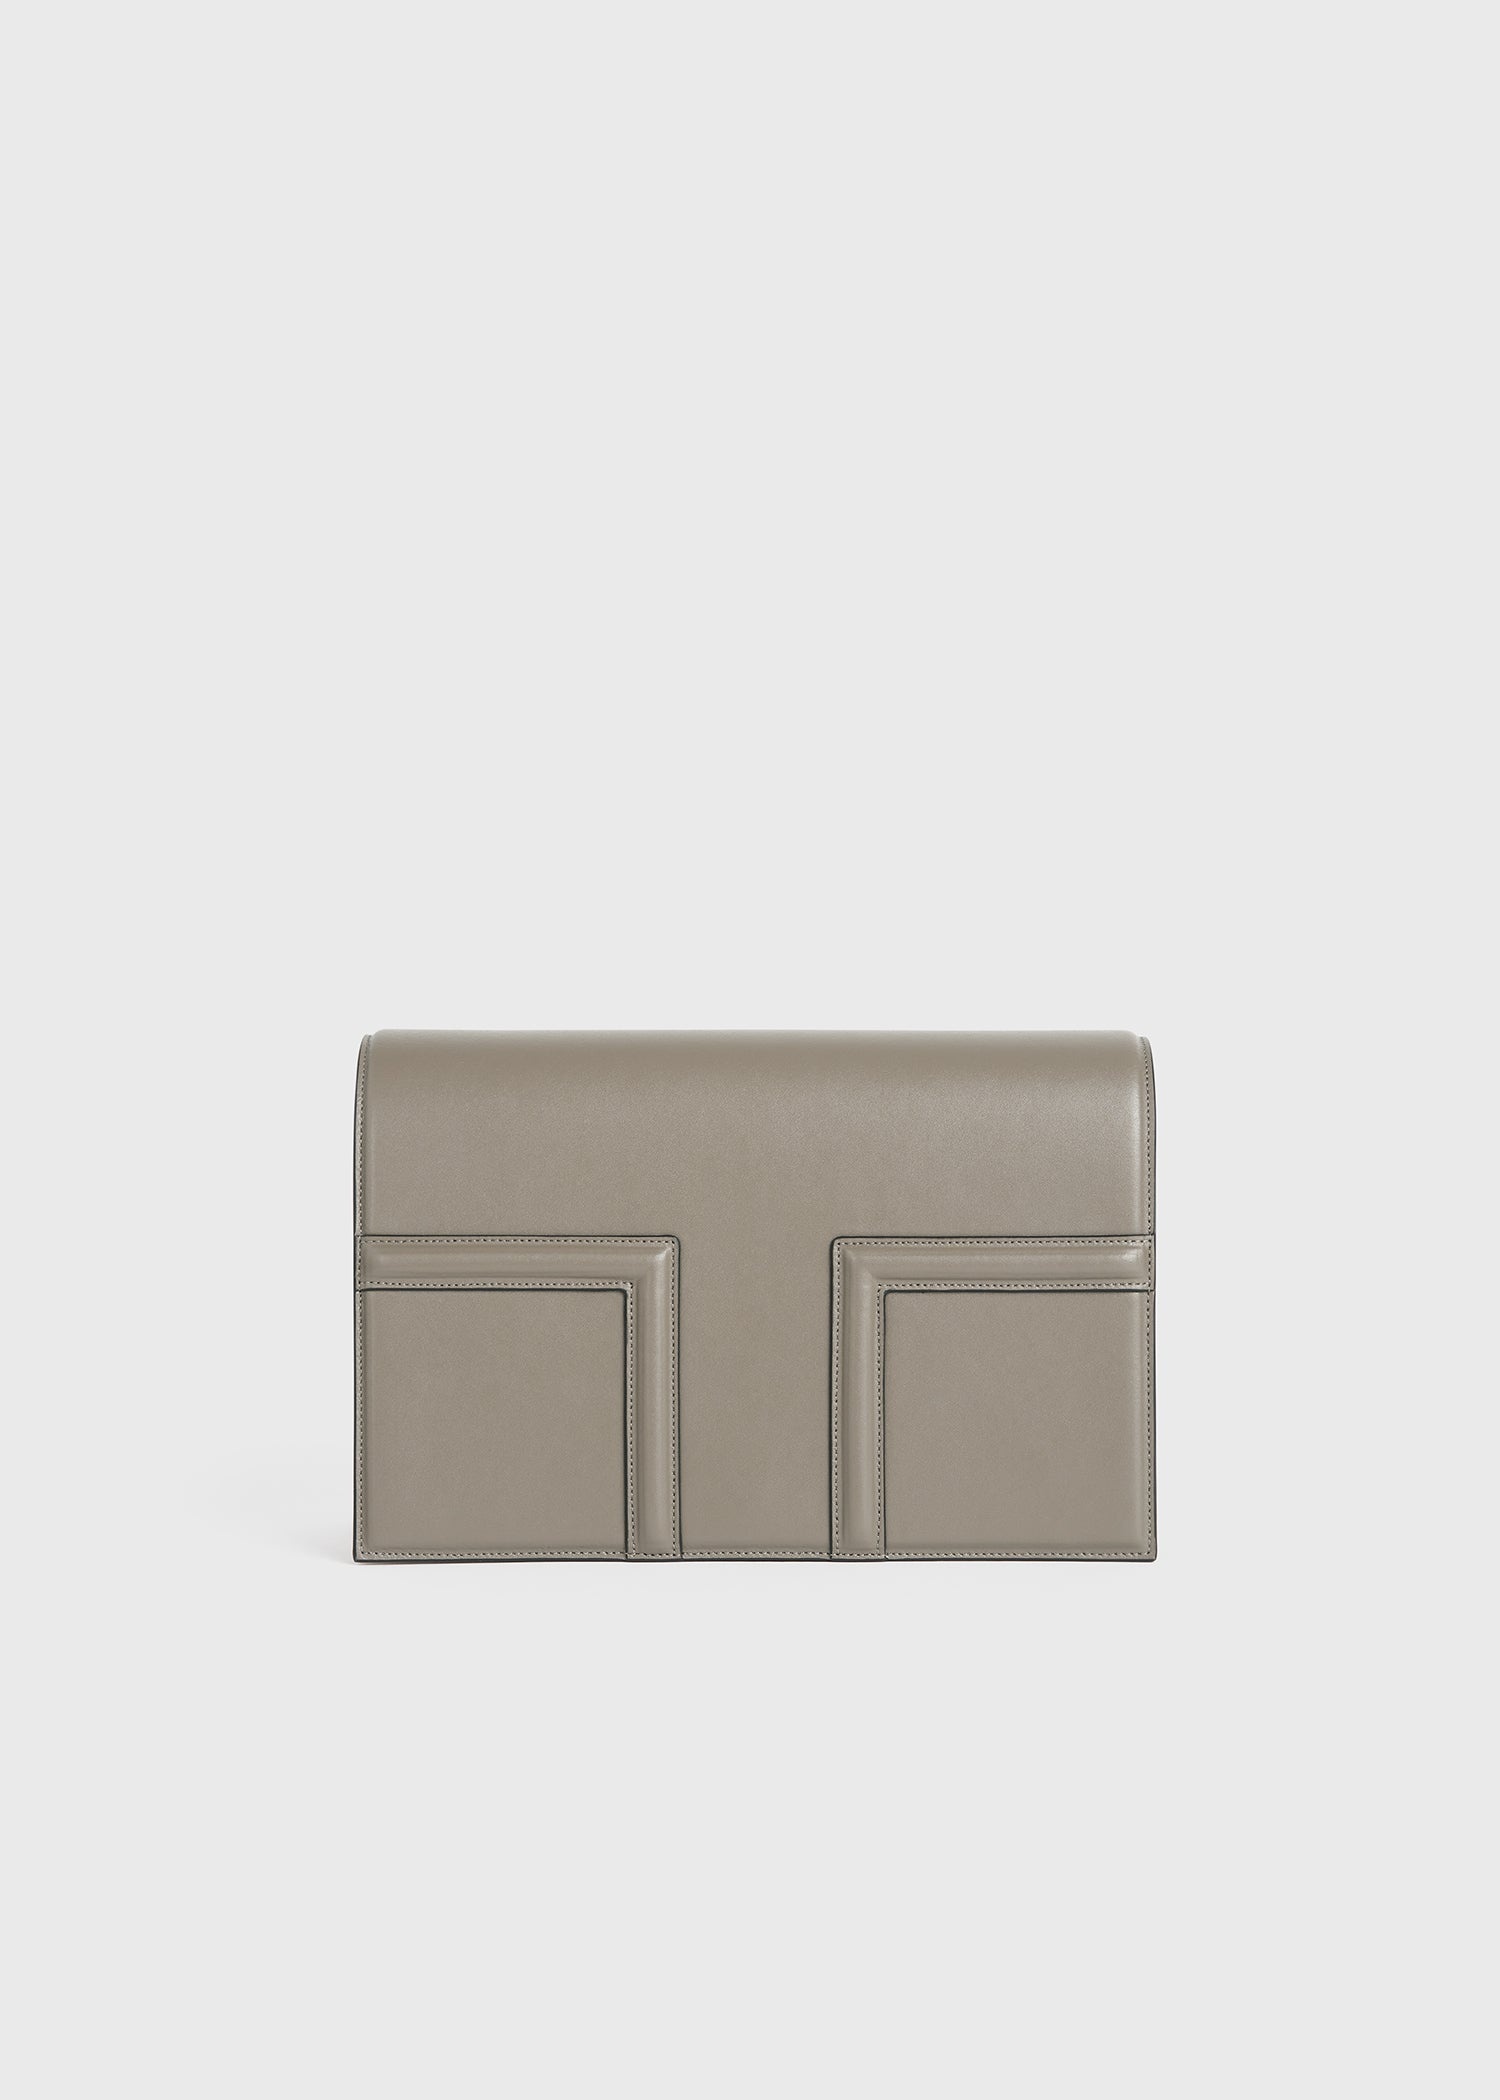 T-Flap bag taupe - 8